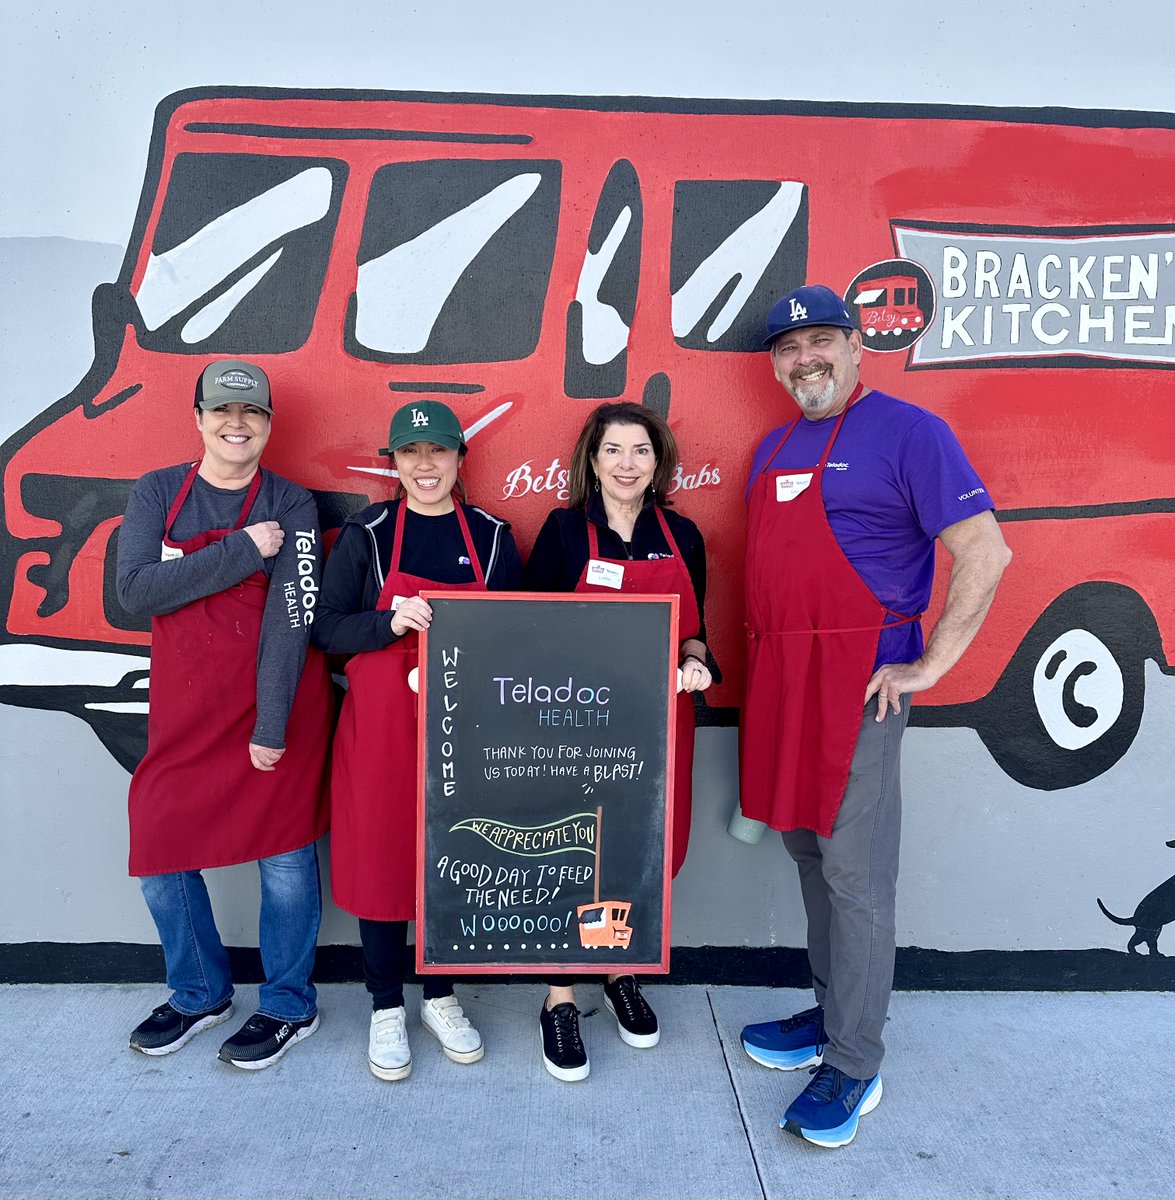 Our impact goes much further when we work together. A few Southern California colleagues volunteered at Bracken's Kitchen recently. Collectively, the group helped assemble 8,000 meals for the community feeding program, providing necessary nourishment to people in need.